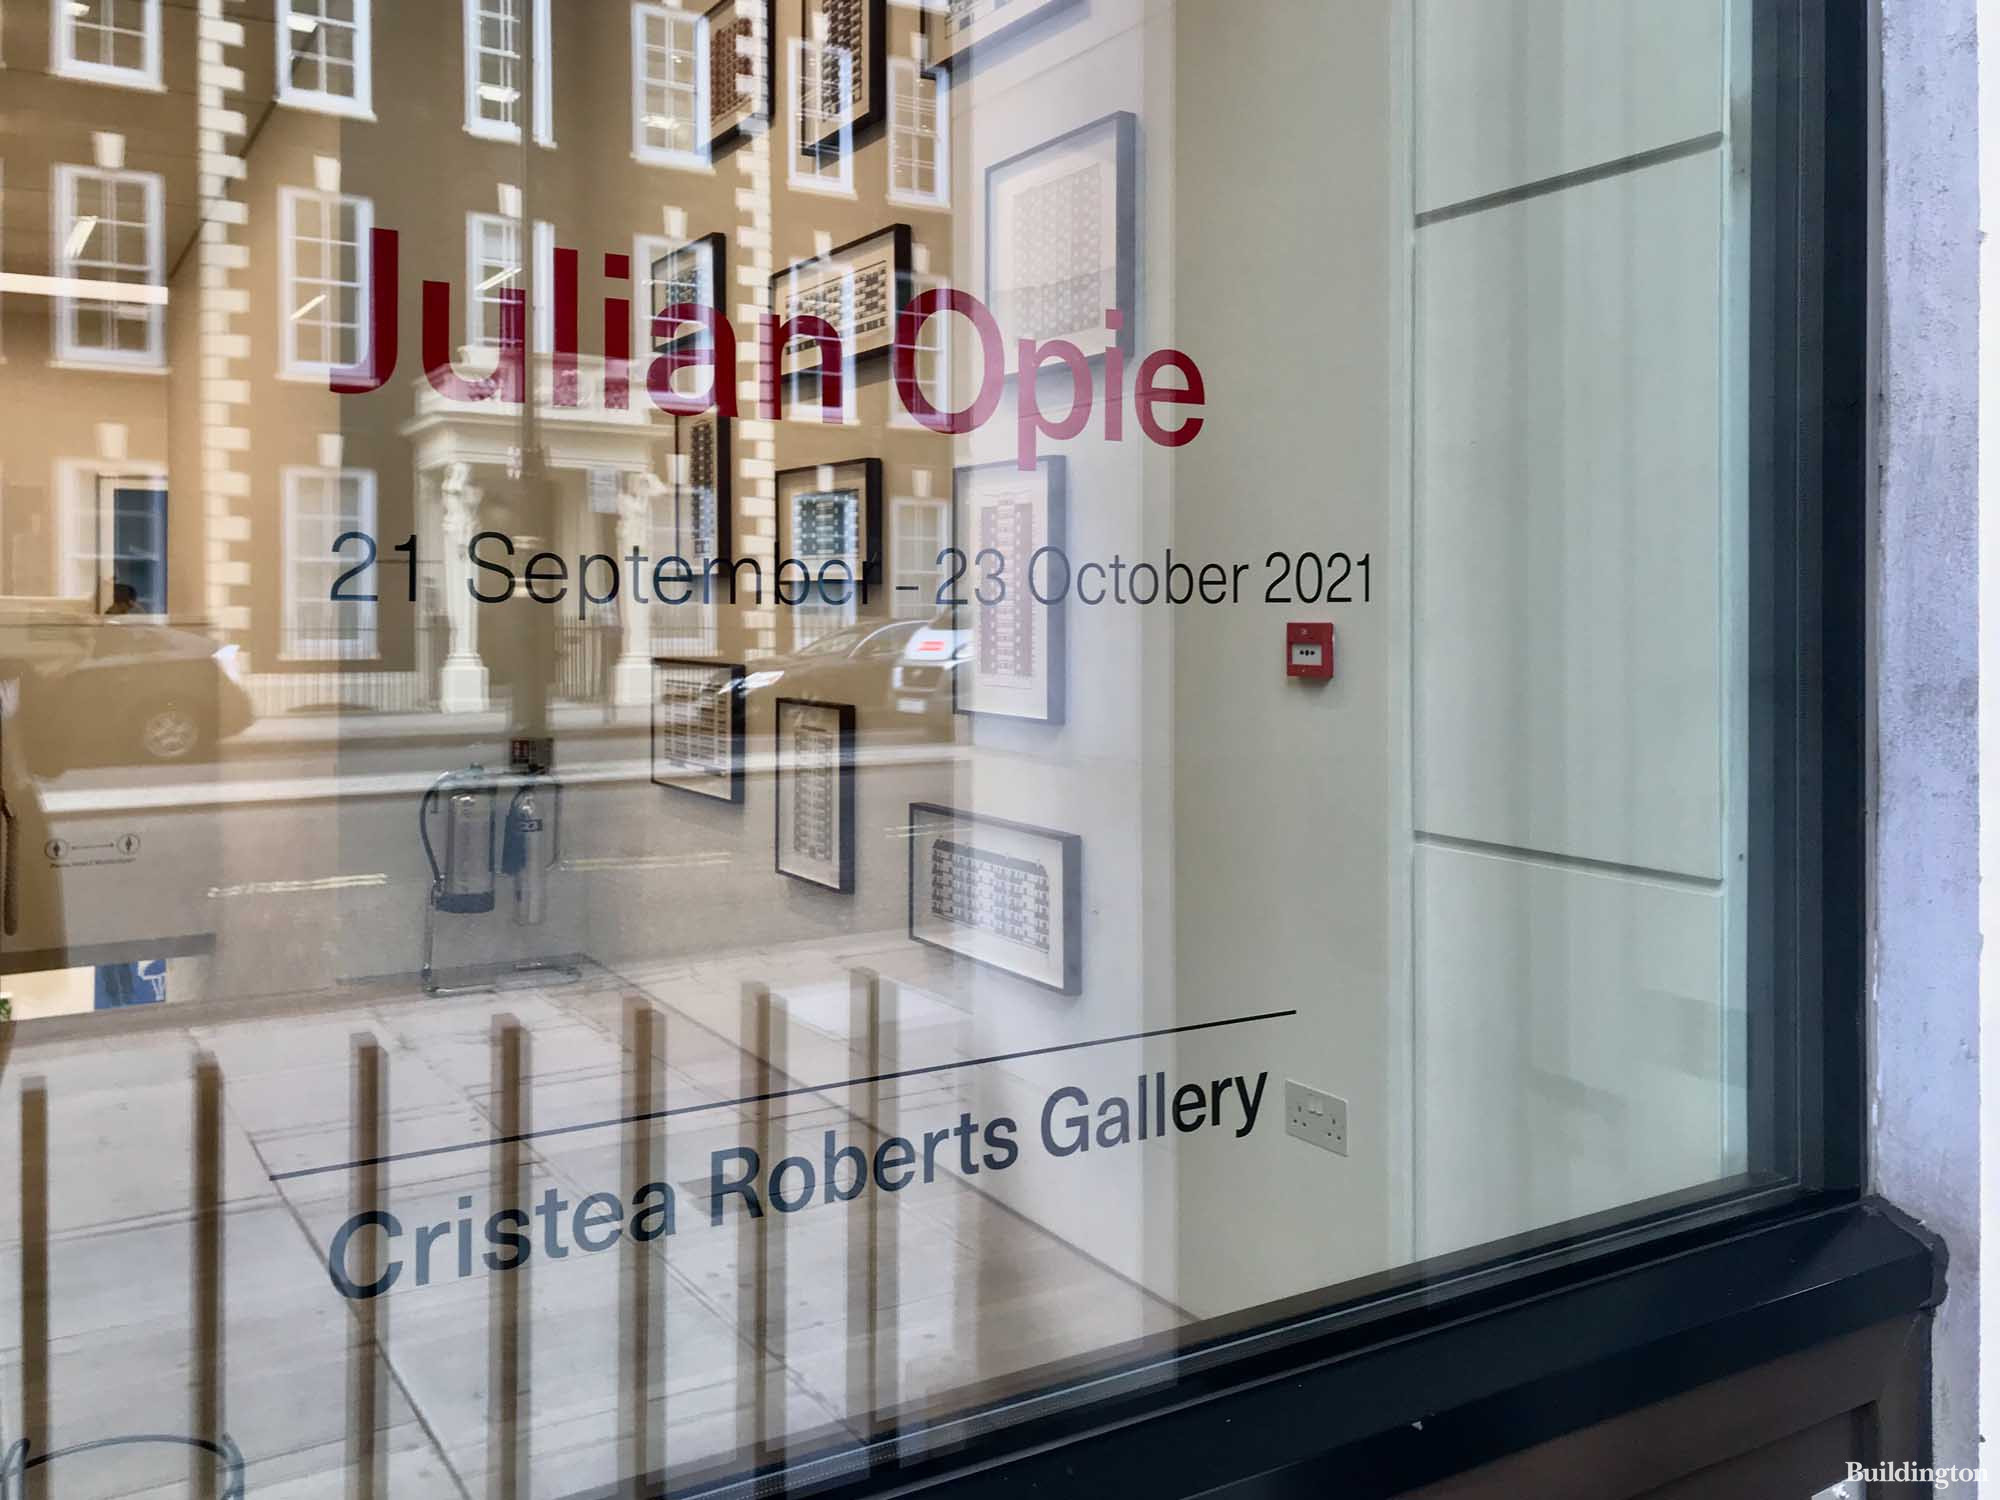 Julian Opie in Cristea Roberts Gallery at 43 Pall Mall, London SW1.